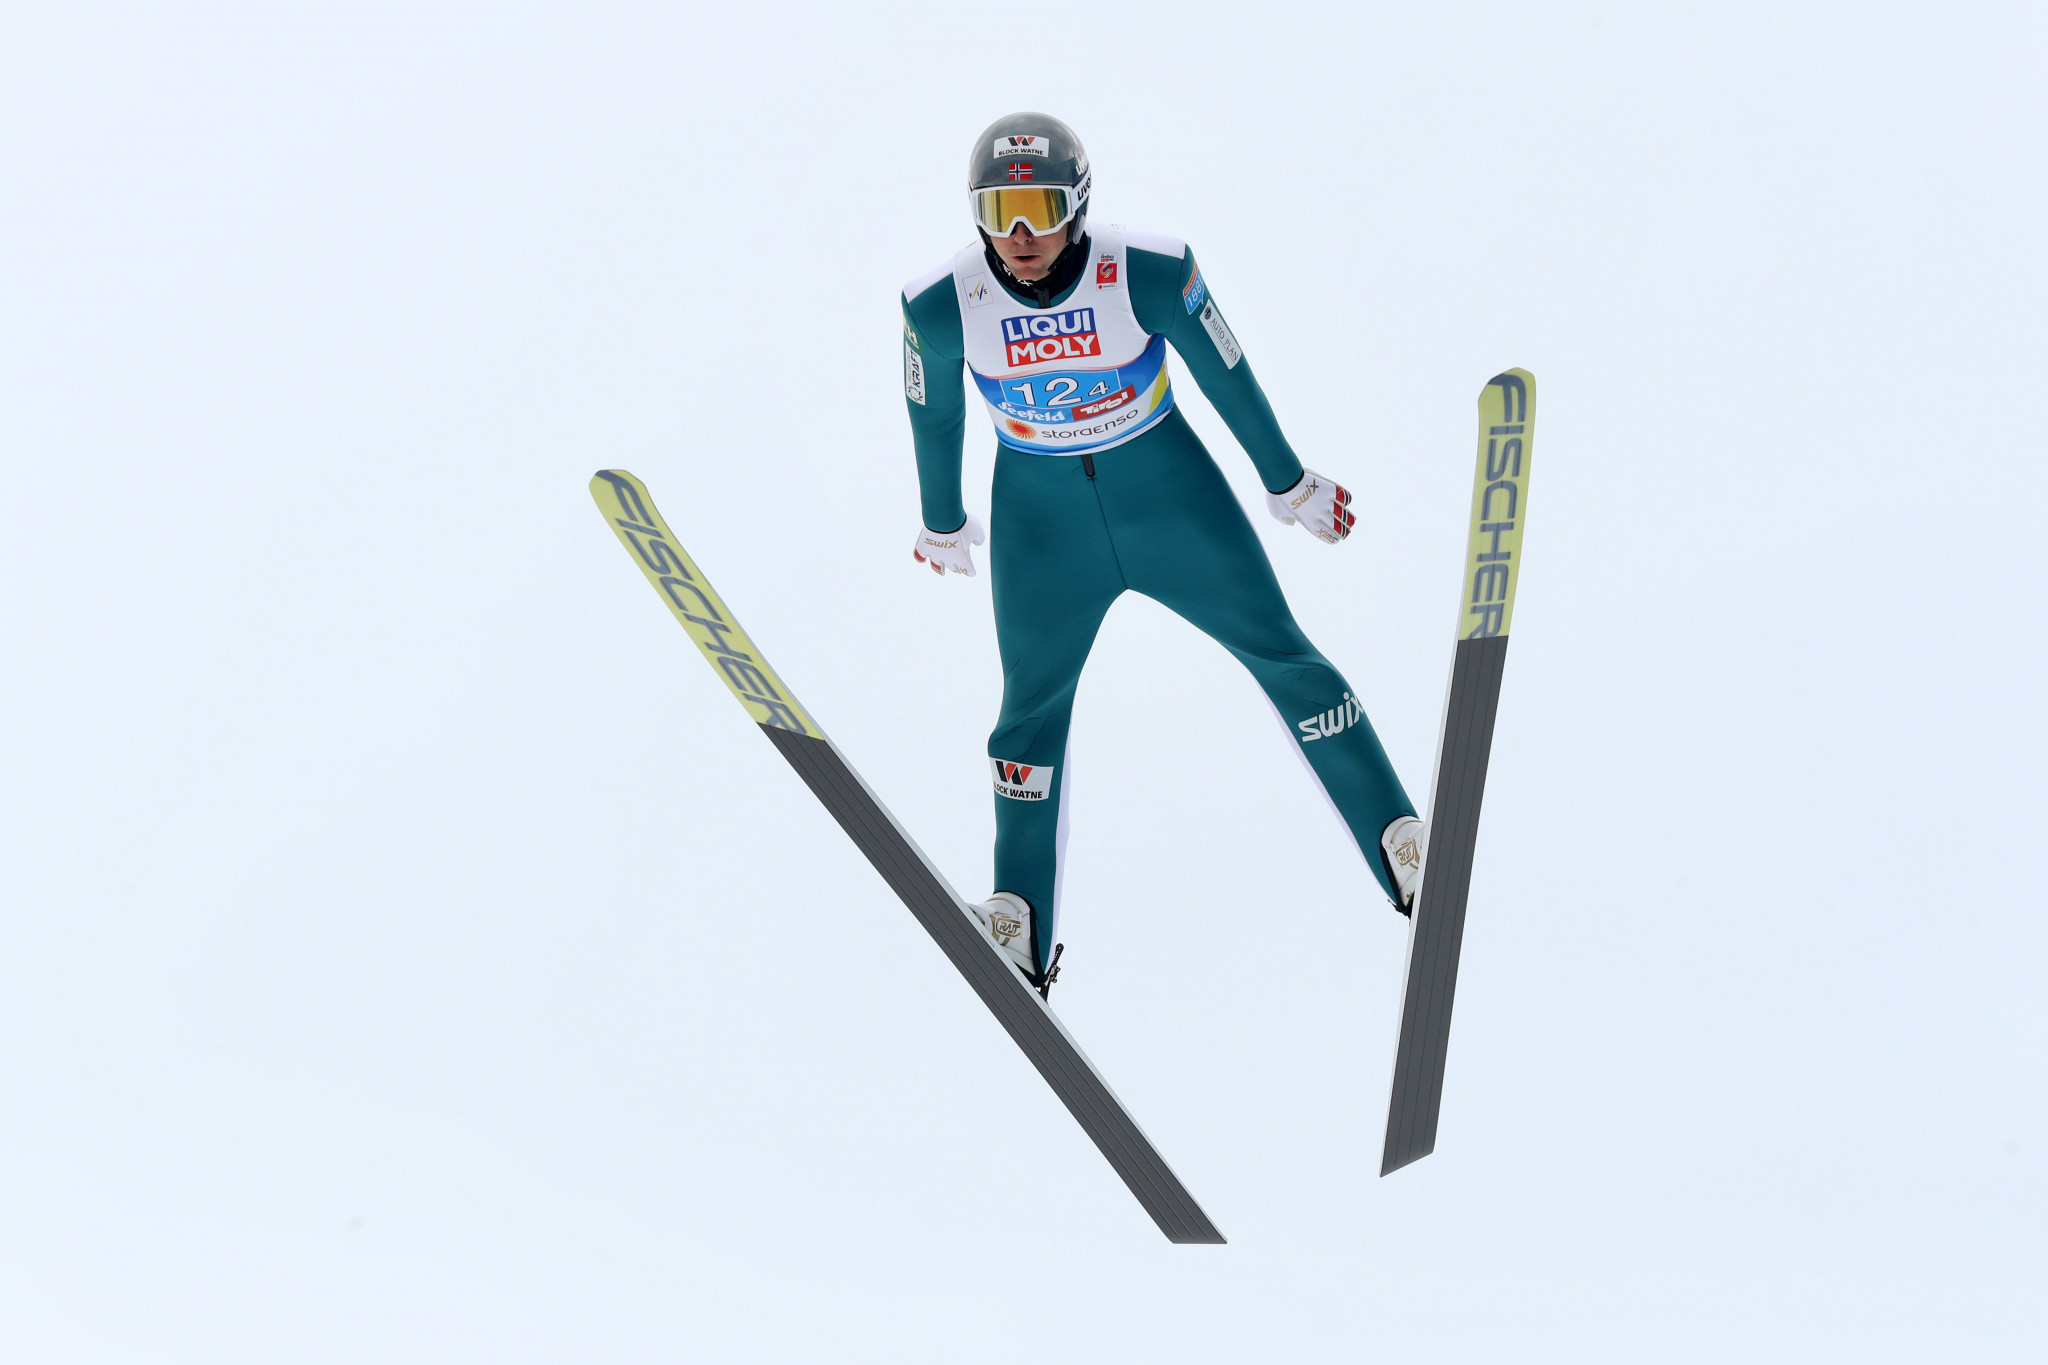 Riiber edges Herola in thrilling finish at FIS Nordic Combined World Cup in Oslo